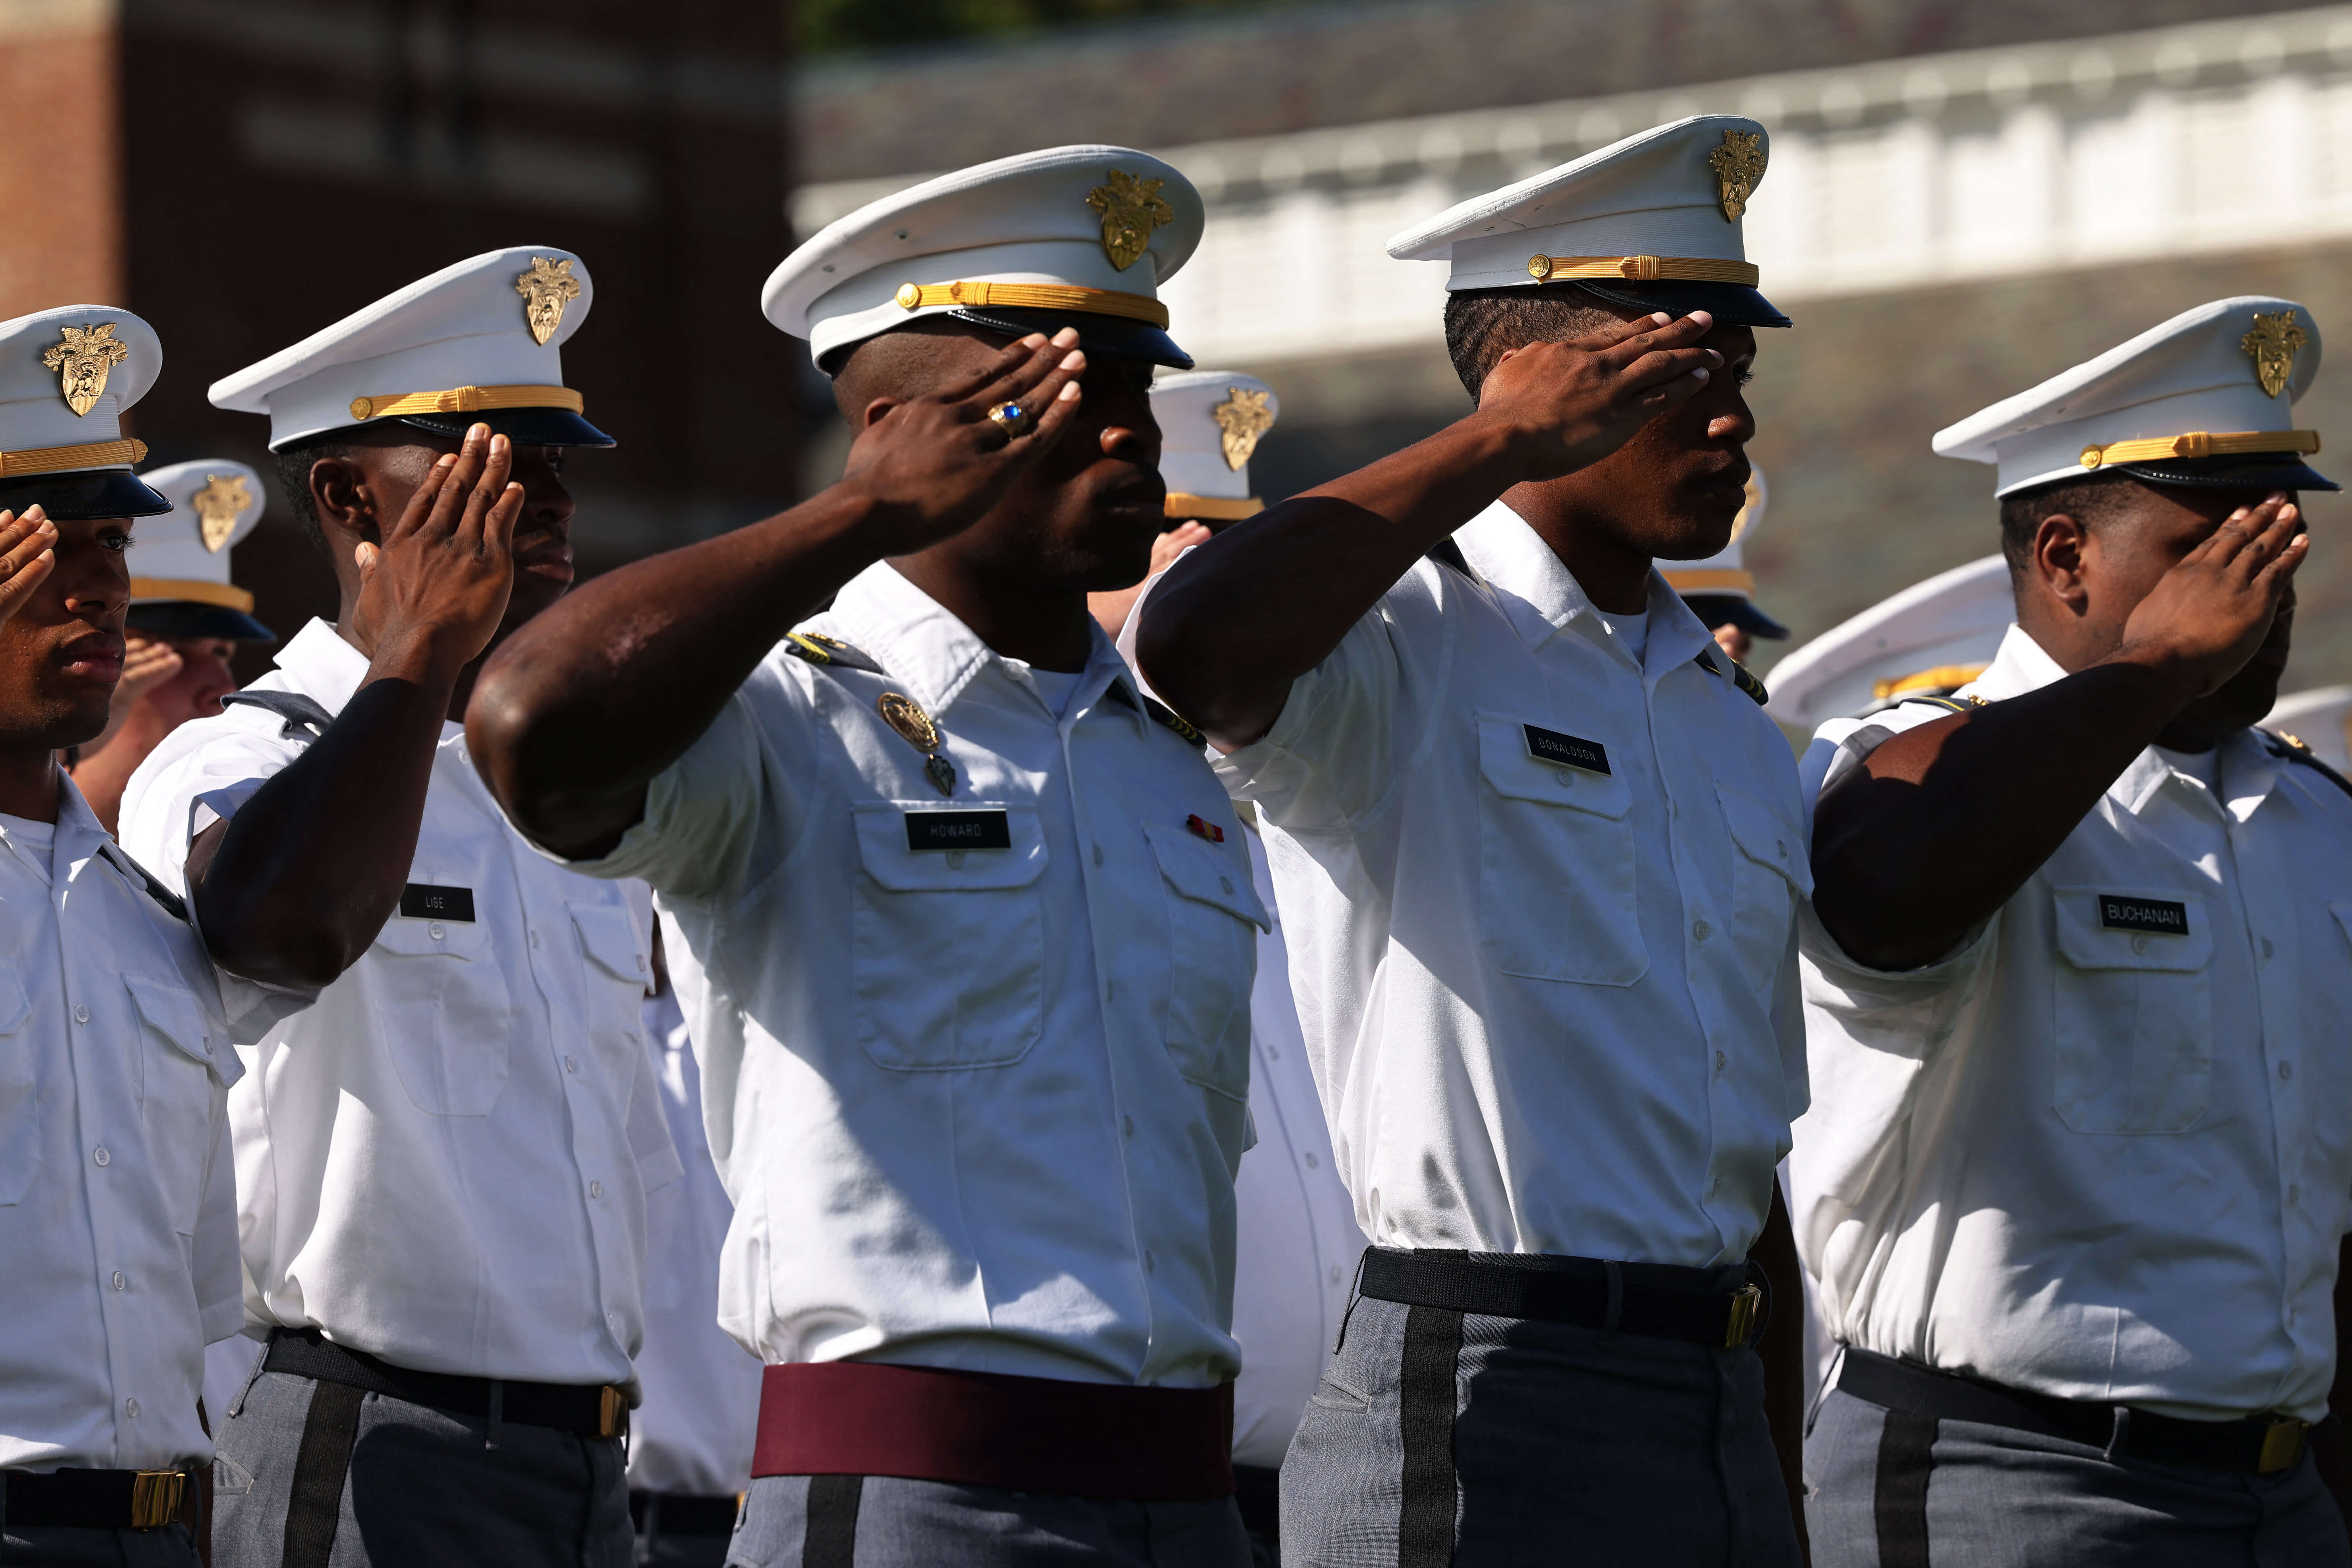 The top military academies around the world and their international alumni